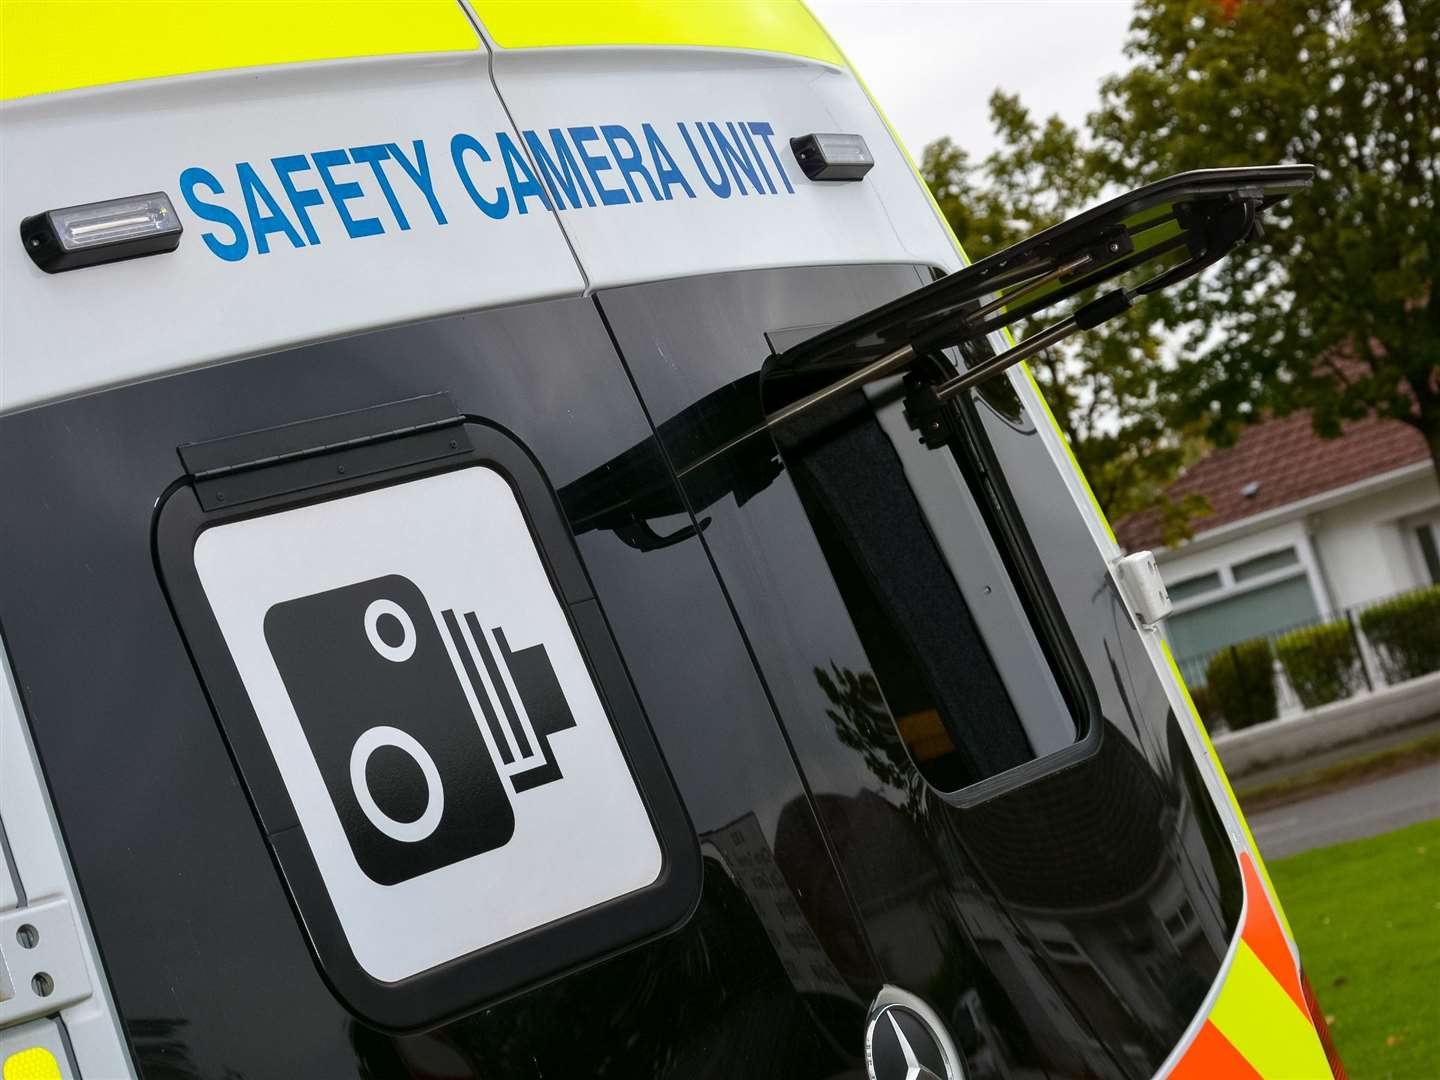 A safety camera unit will take enforcement action at a new location in Kintore